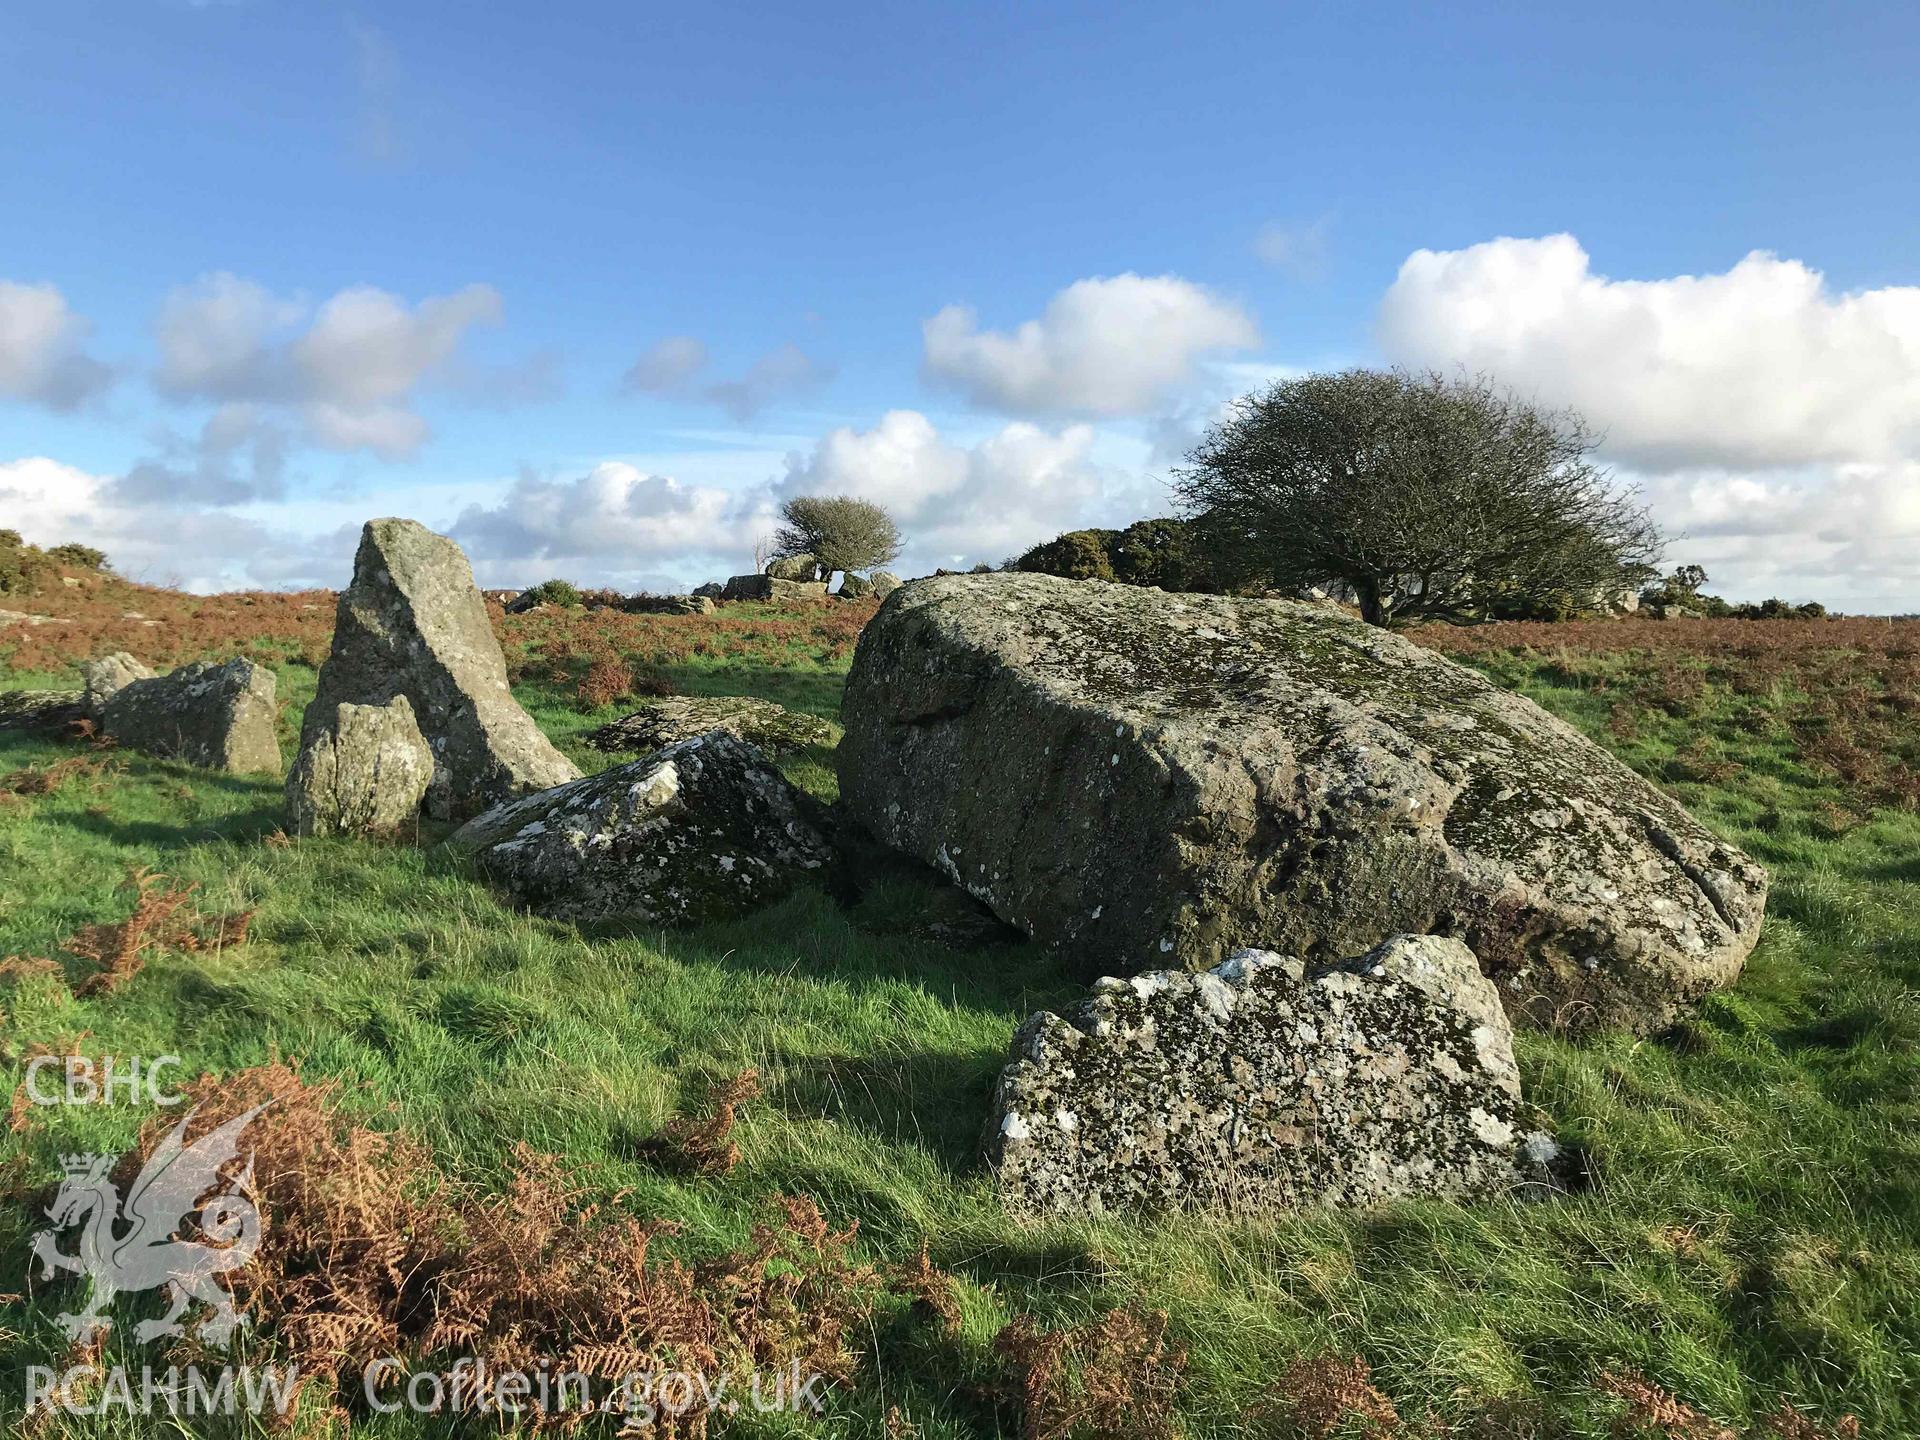 Digital photograph showing detailed view of Carn Turne chambered tomb, produced by Paul Davis in 2020